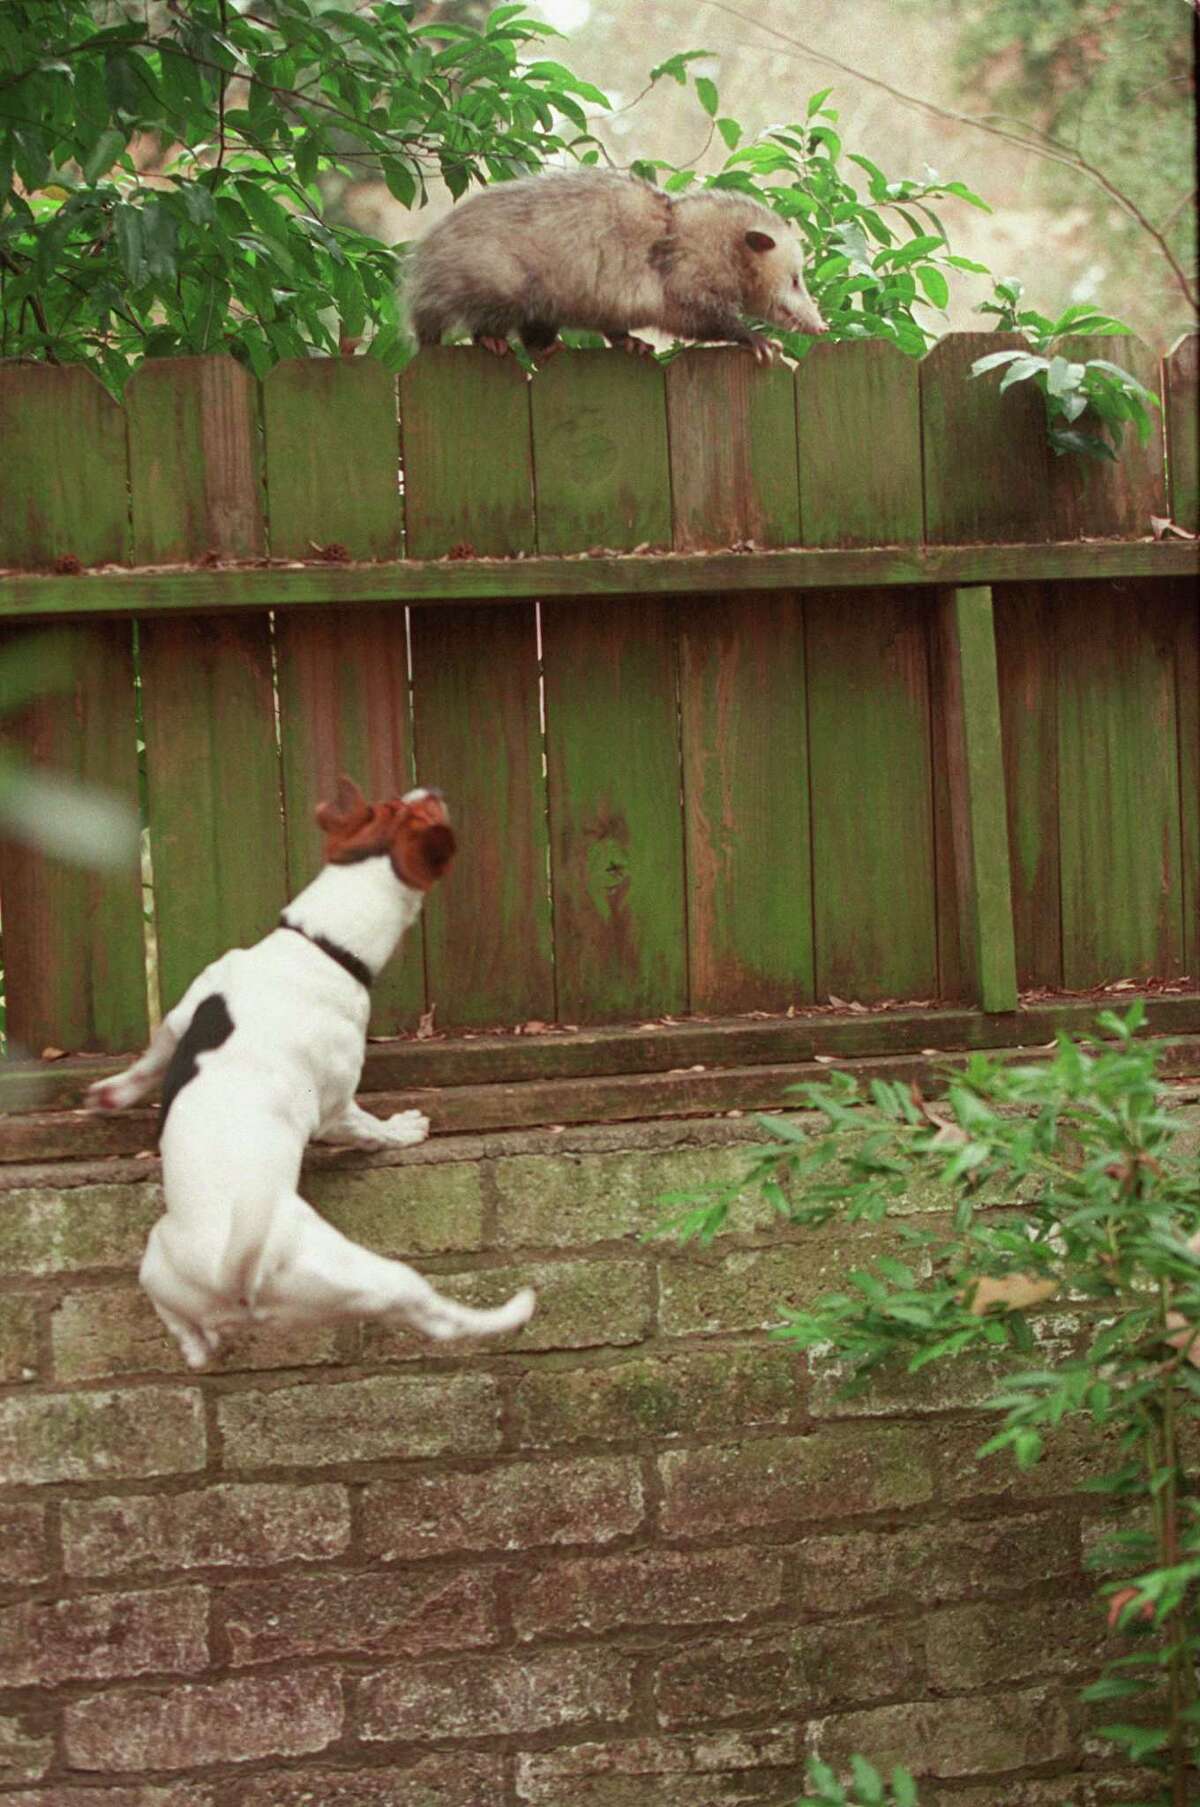 In this 2002 photo, a Jack ussell terrier defends his territory against an opossum foraging for food. Opossums are nocturnal, but they may leave the nest during the day when hungry or when something disturbs the nest.